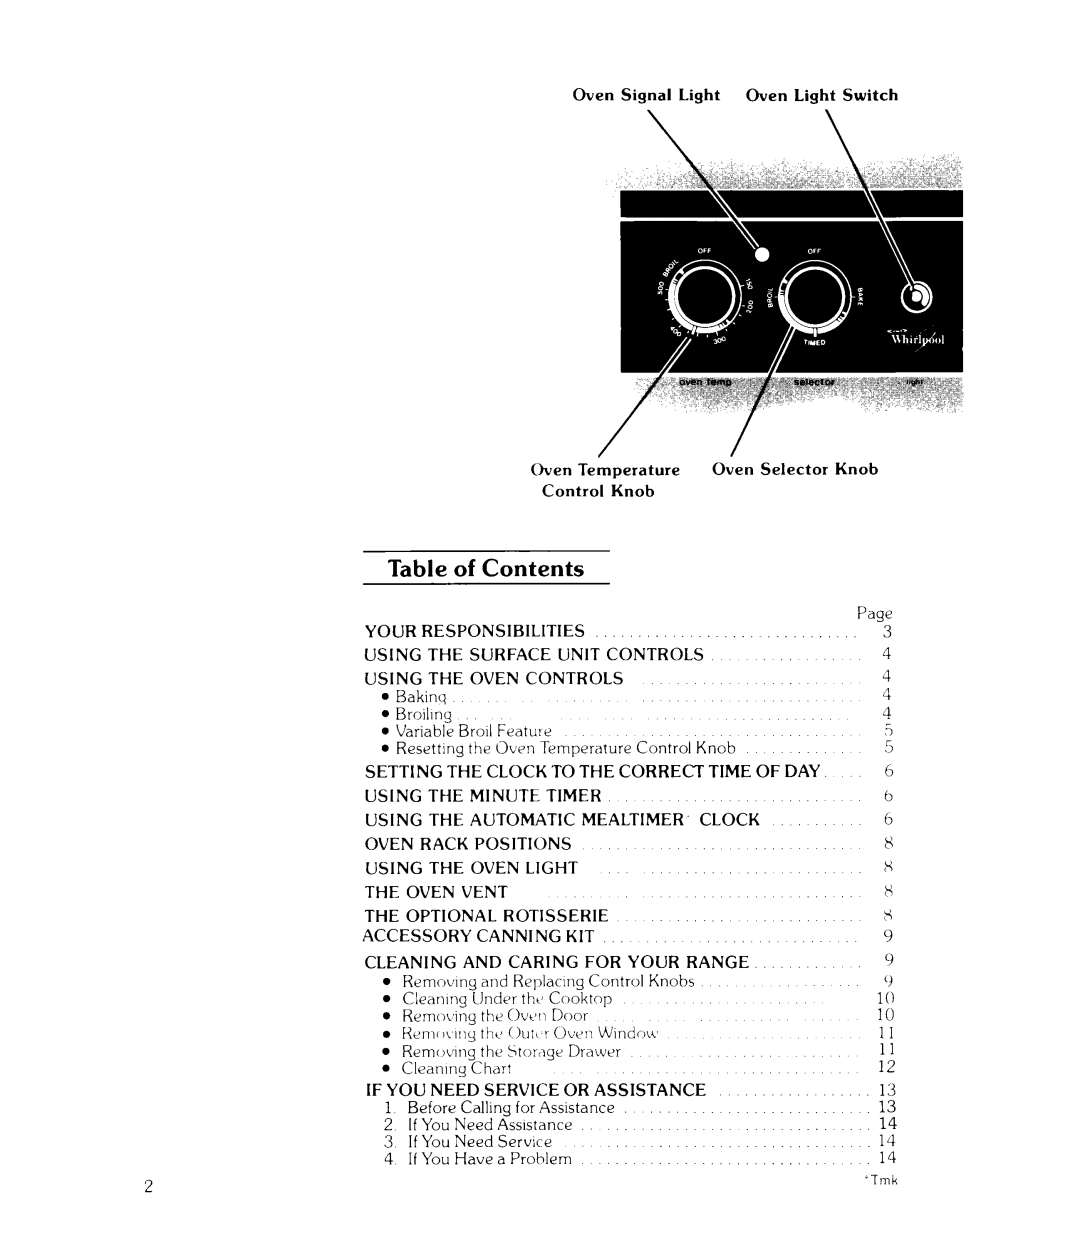 Whirlpool RJE-3165 manual of Contents 